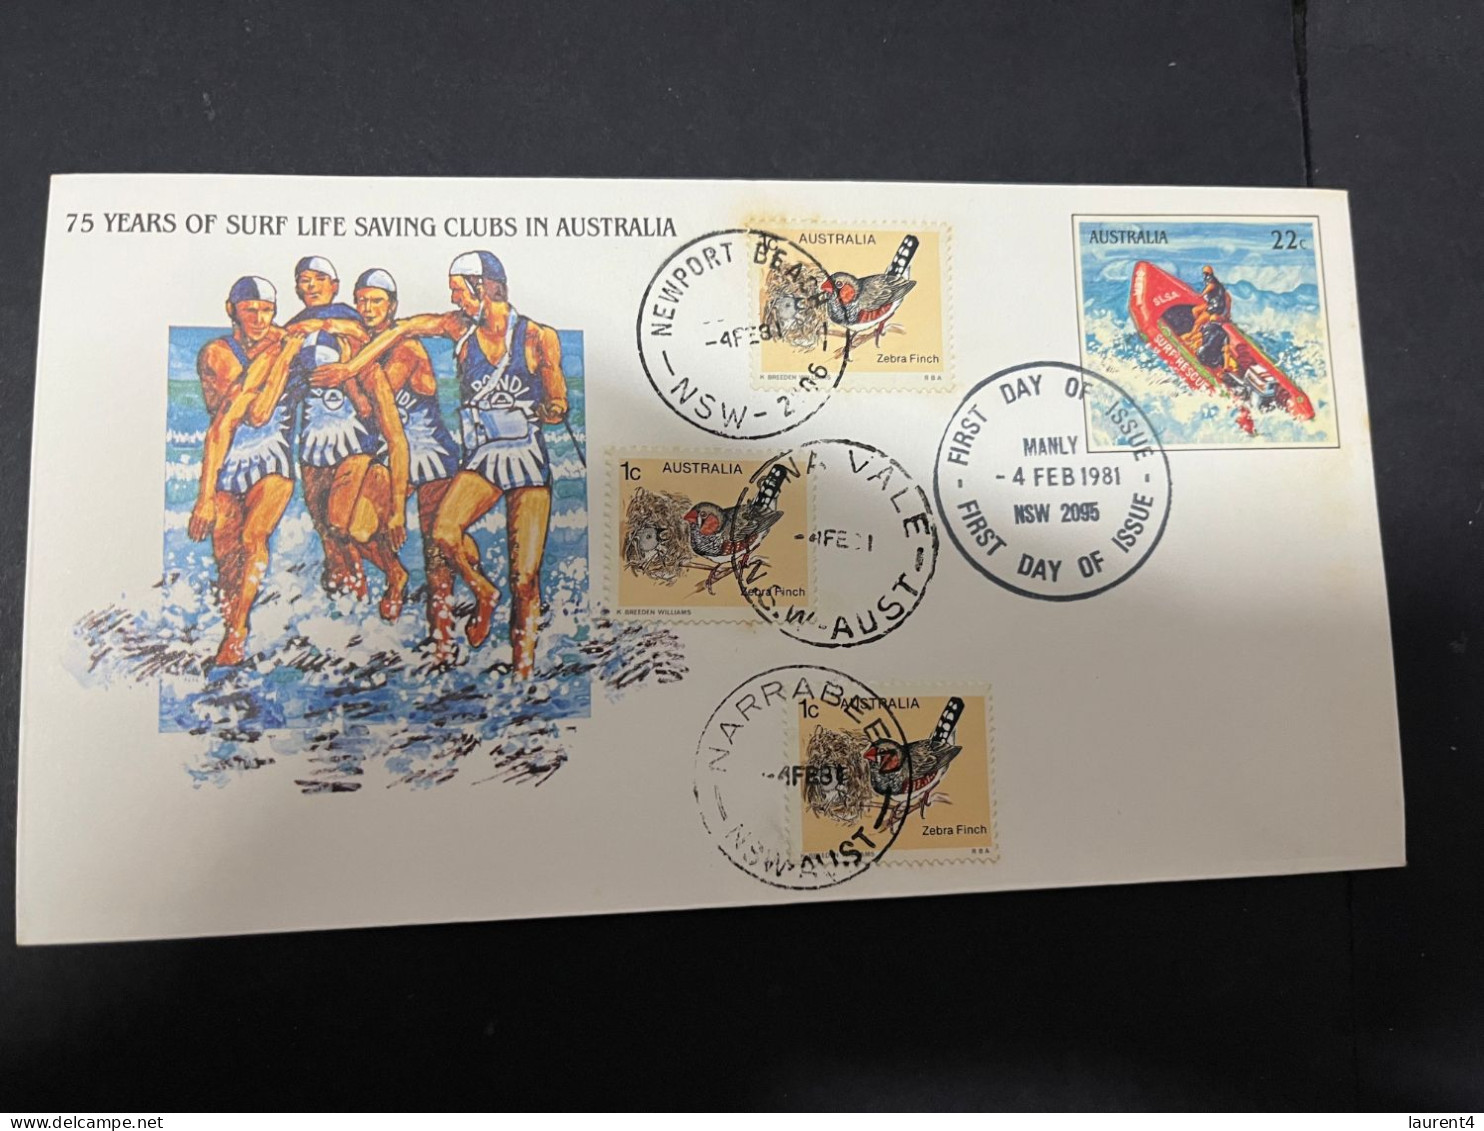 12-4-2024 (1 Z 44) Australia FDC - 75th Anniversary Of Life Surf Clubs In Austraia (2 Covers) 1981 - Premiers Jours (FDC)